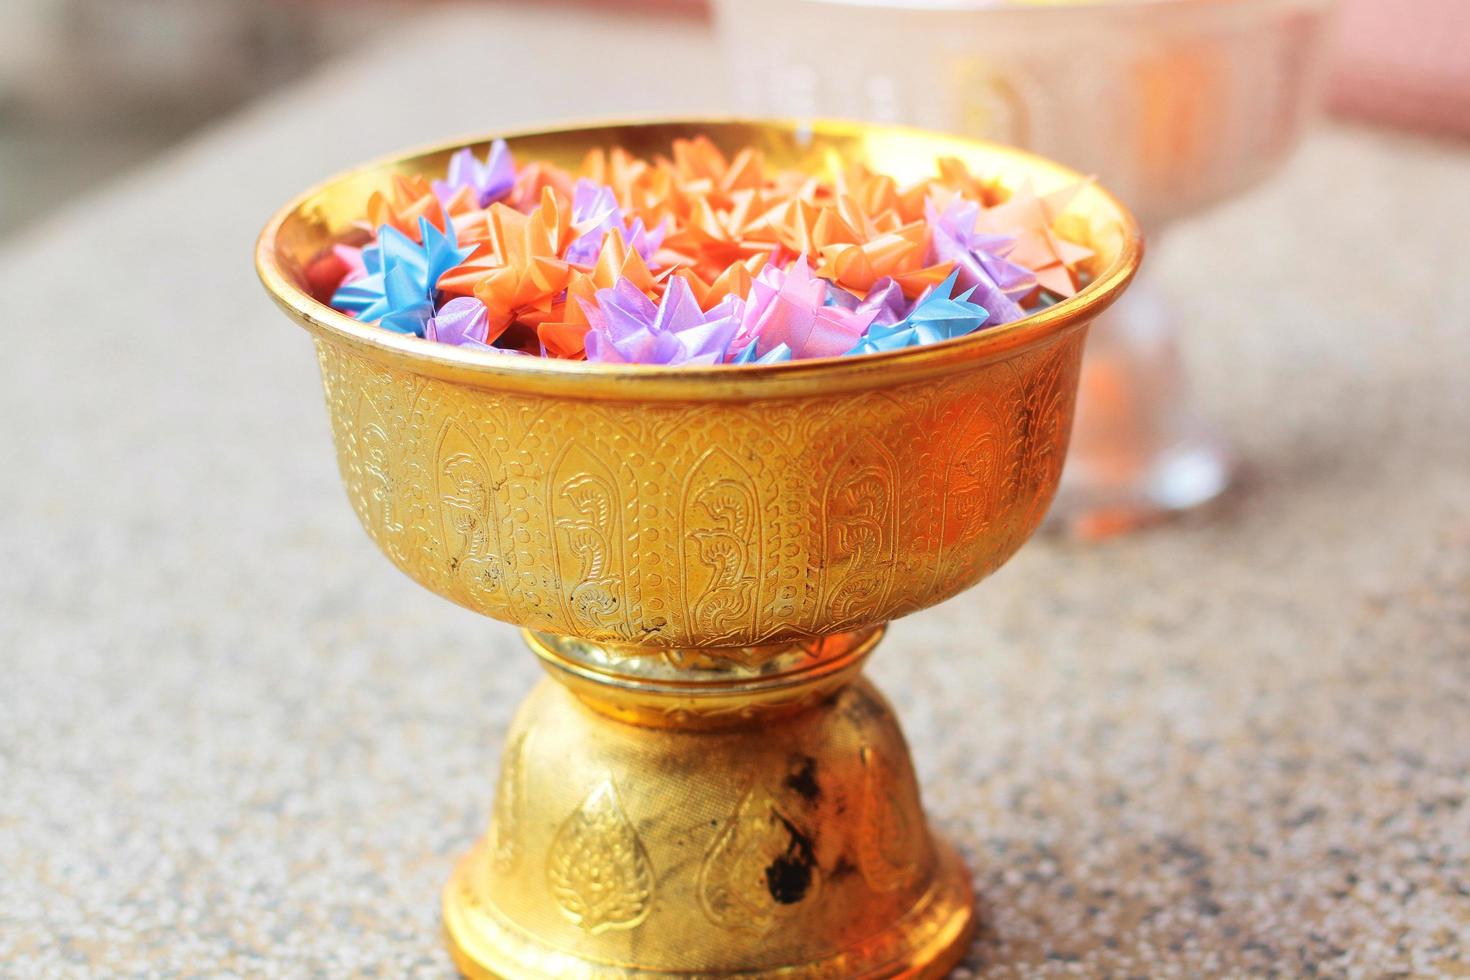 Colorful of Ribbon flowers on gold Tray for Ordination ceremony in buddhist Thai monk. photo